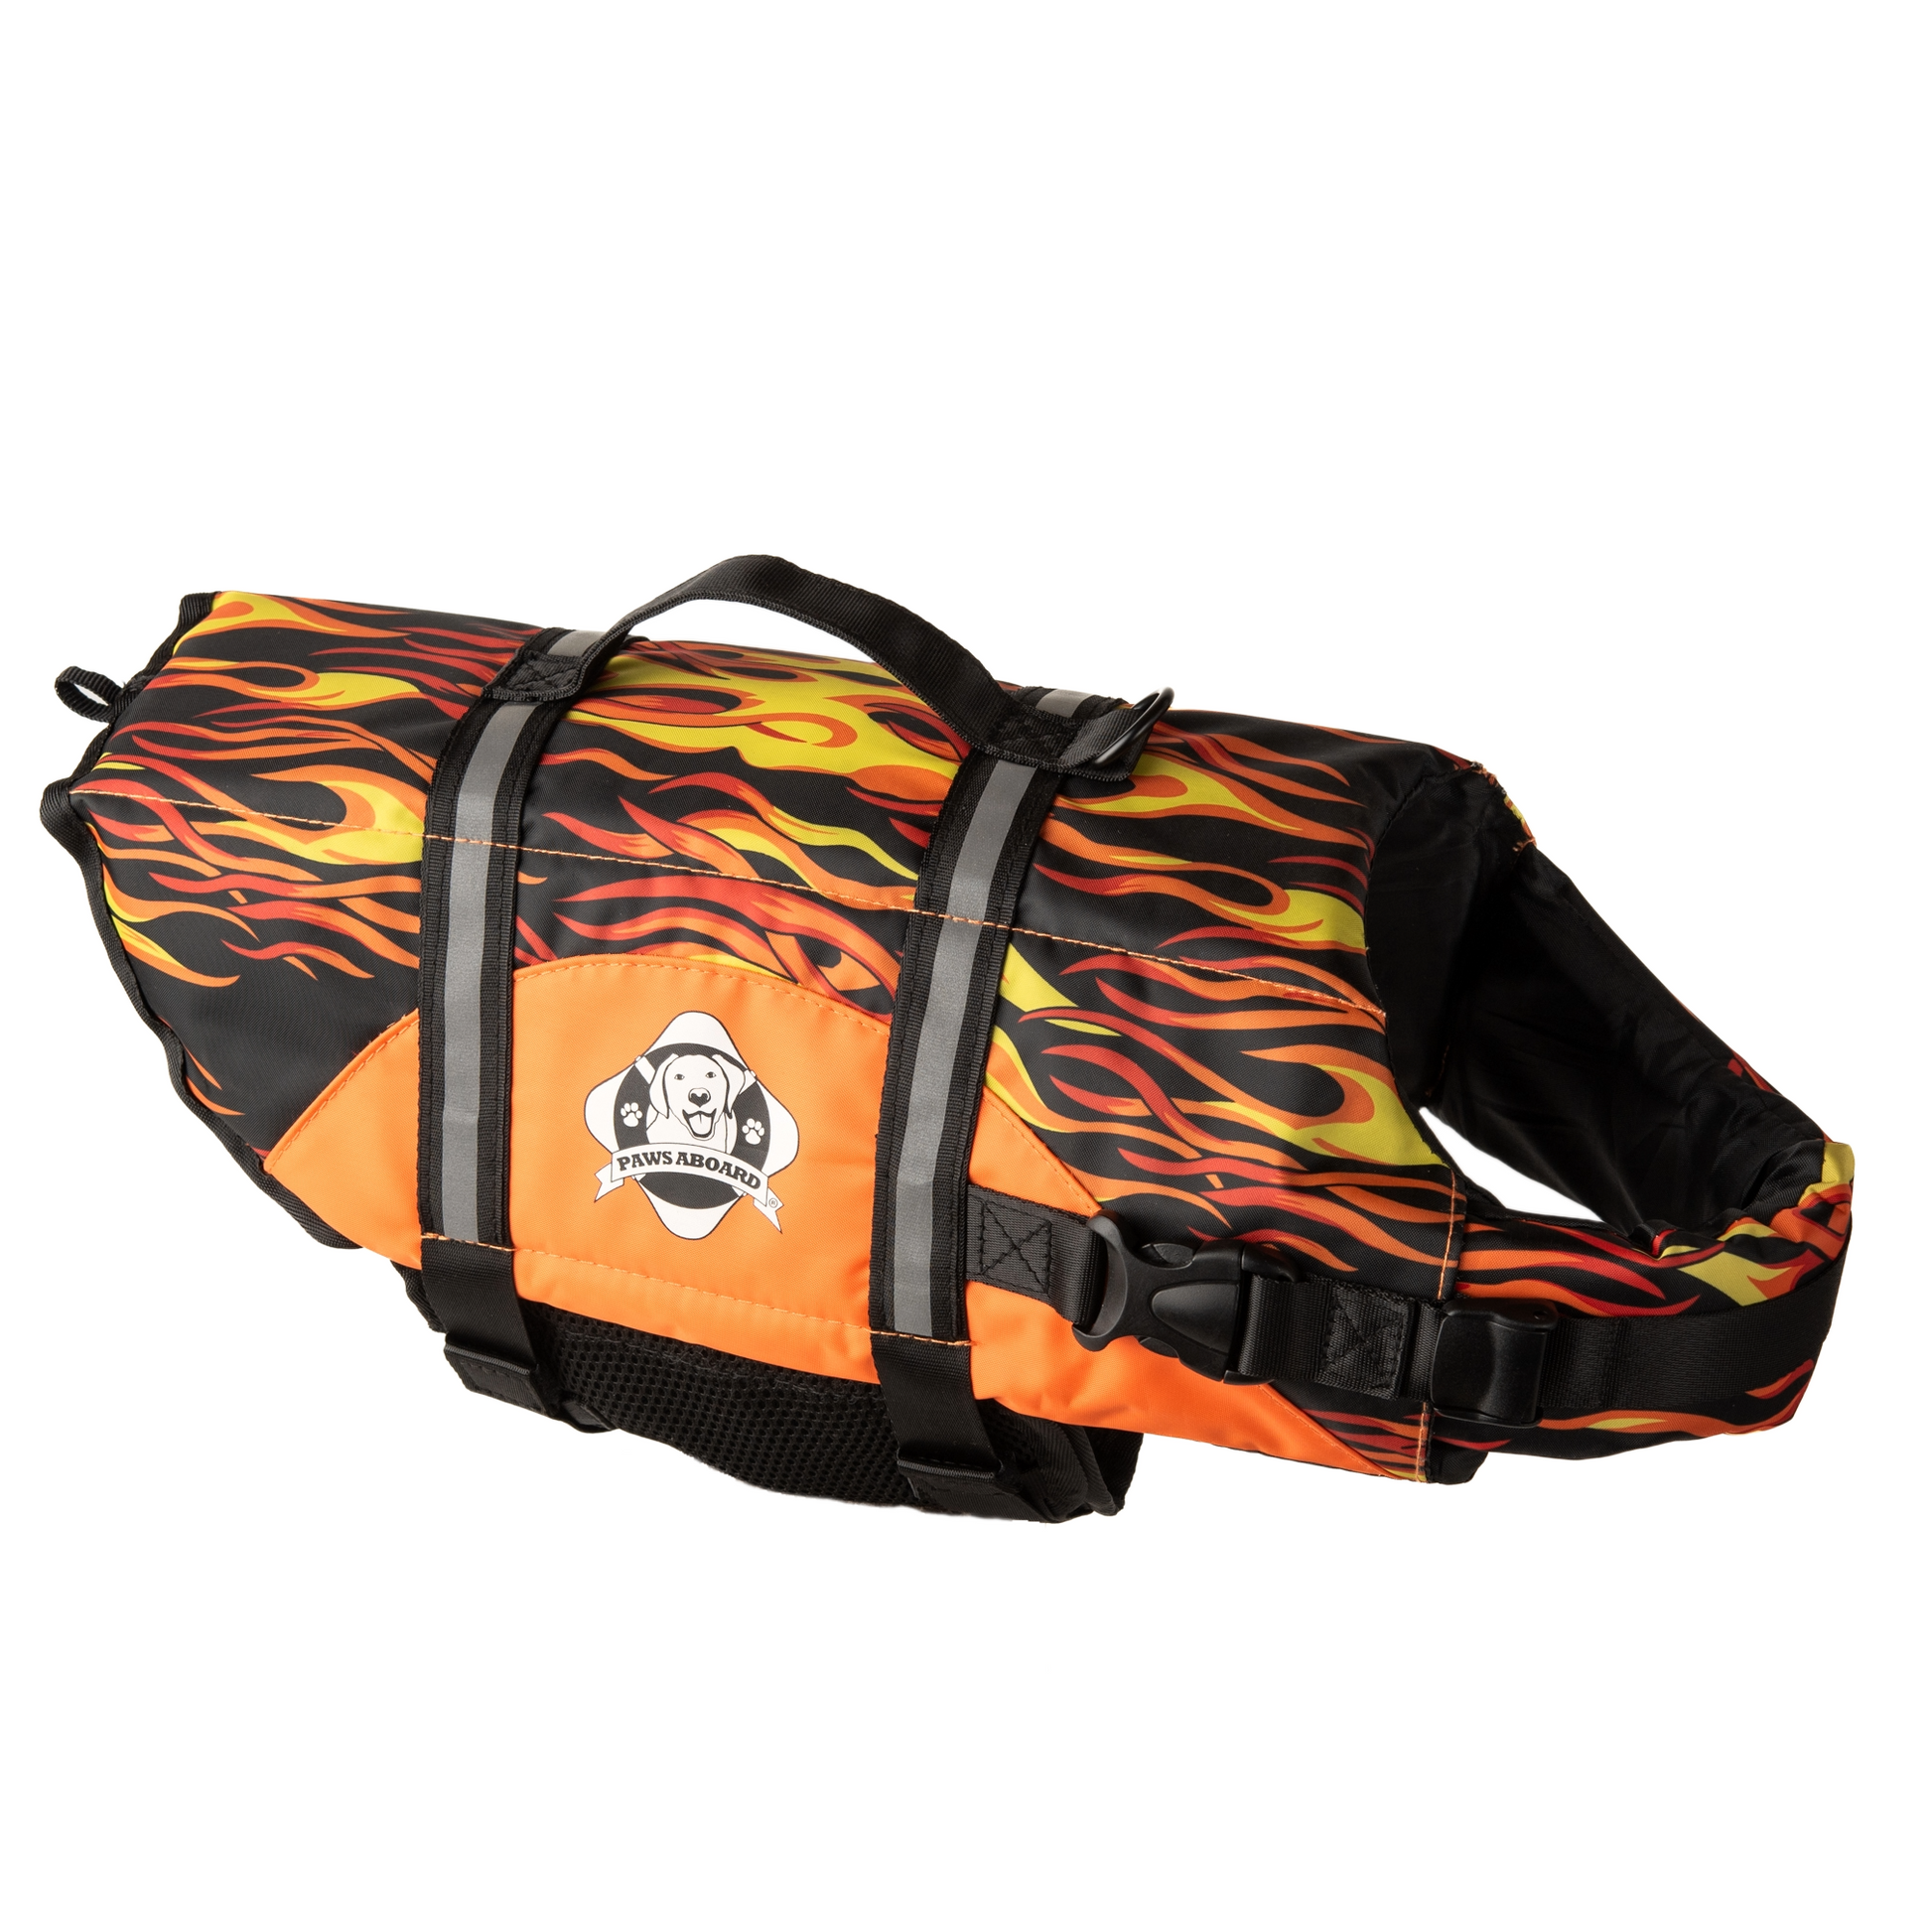 Racing Flames dog life jacket by Fido Pet Products with reflective strips, breatheable mesh underbelly, and secure handle with leash clip at top.